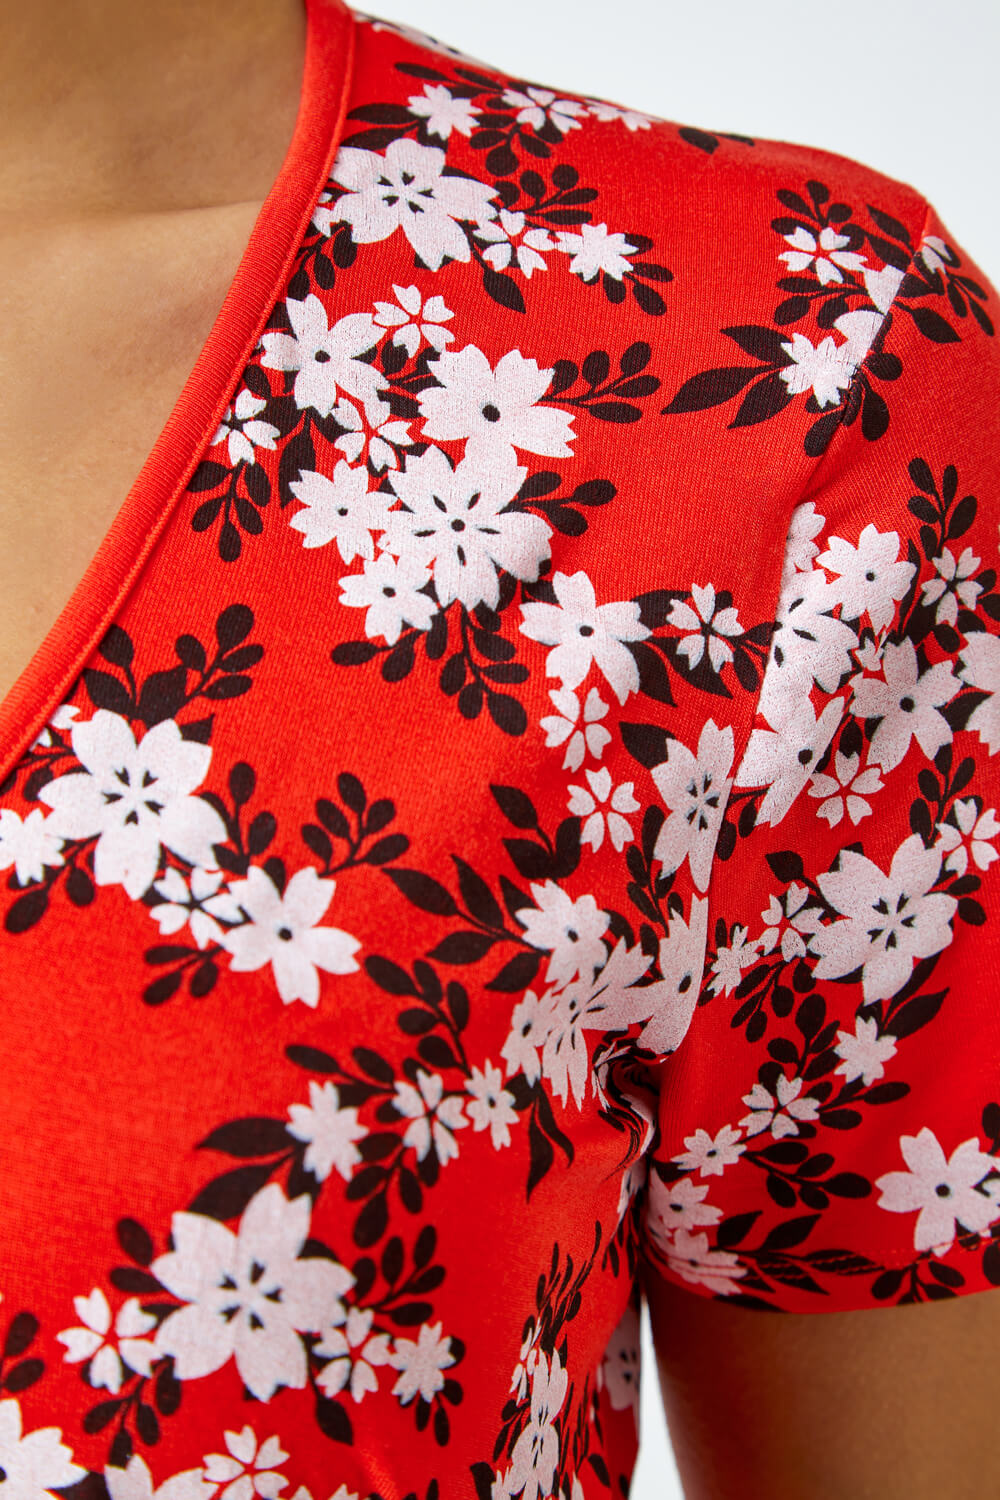 Red Floral Print Wrap Stretch Top, Image 5 of 5